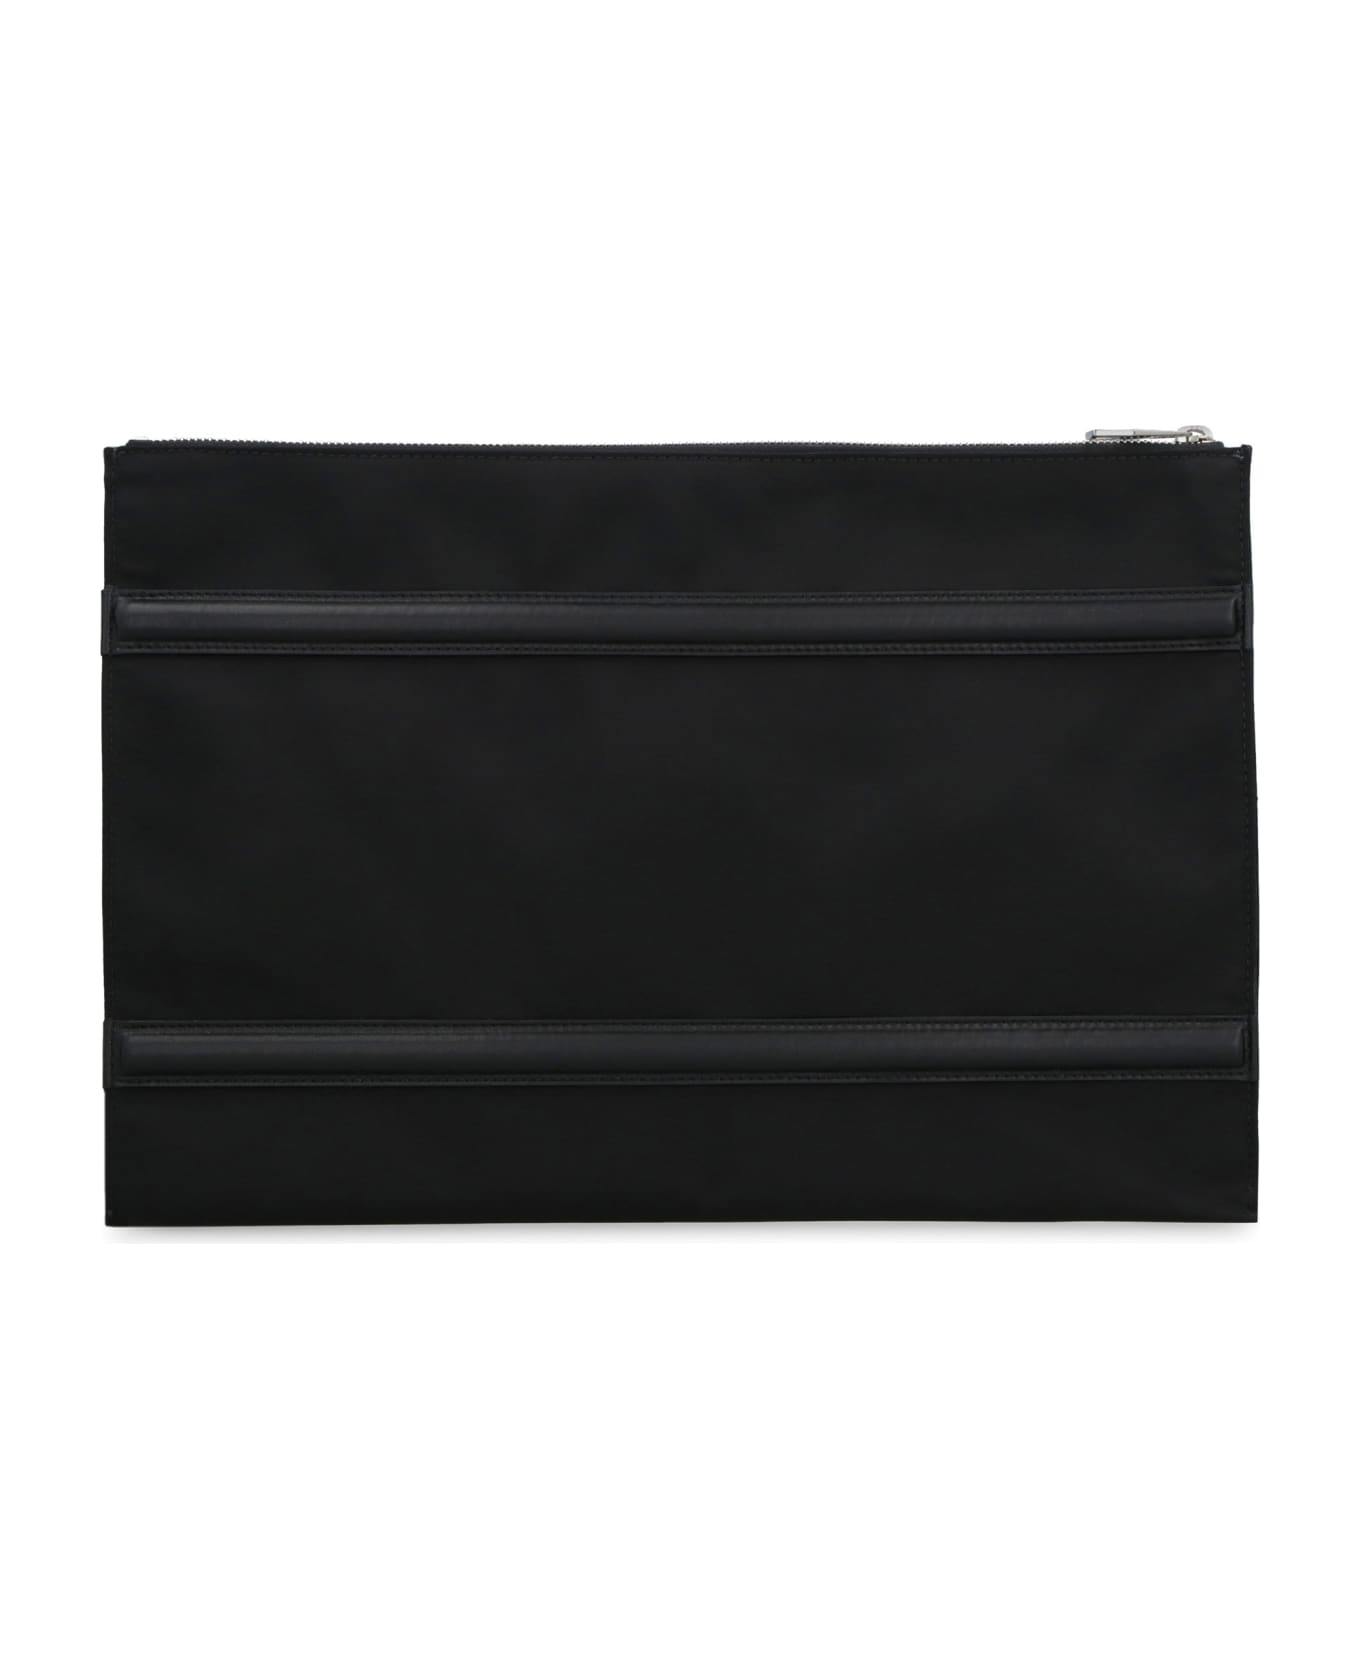 Alexander McQueen Harness Nylon Pouch-bag With Logo - black